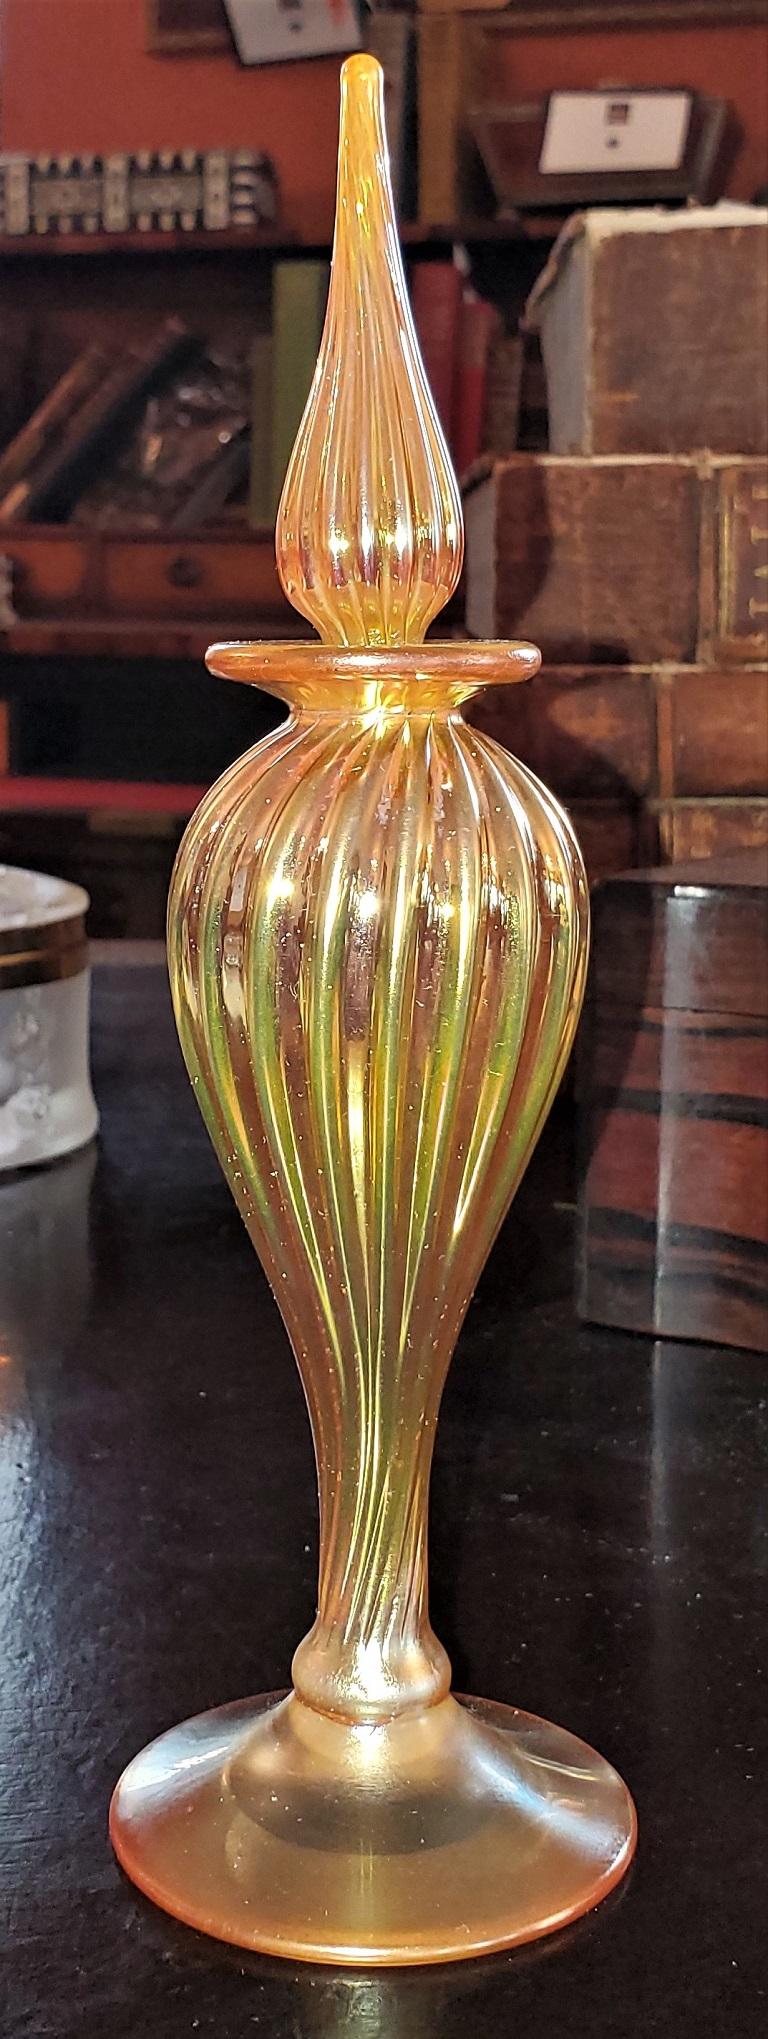 Presenting a beautiful Steven Correia art glass perfume bottle,

American, circa 1980.

Luminescent yellow/orange/gold bulbous base with ribbed detail and original ribbed and fluted stopper.

Fully signed and marked with serial numbers etc on